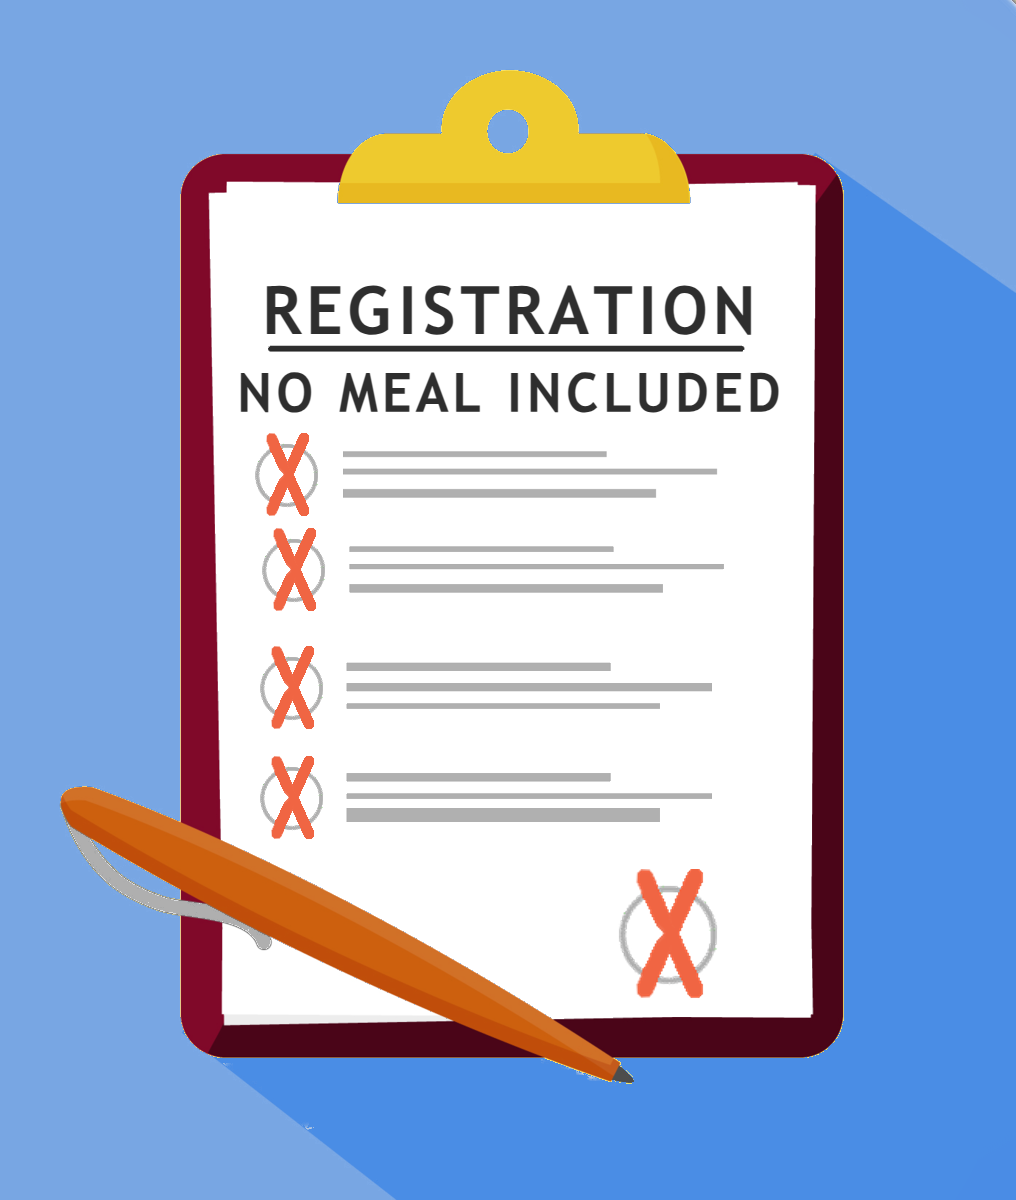 Meeting Registration w/ No Meal